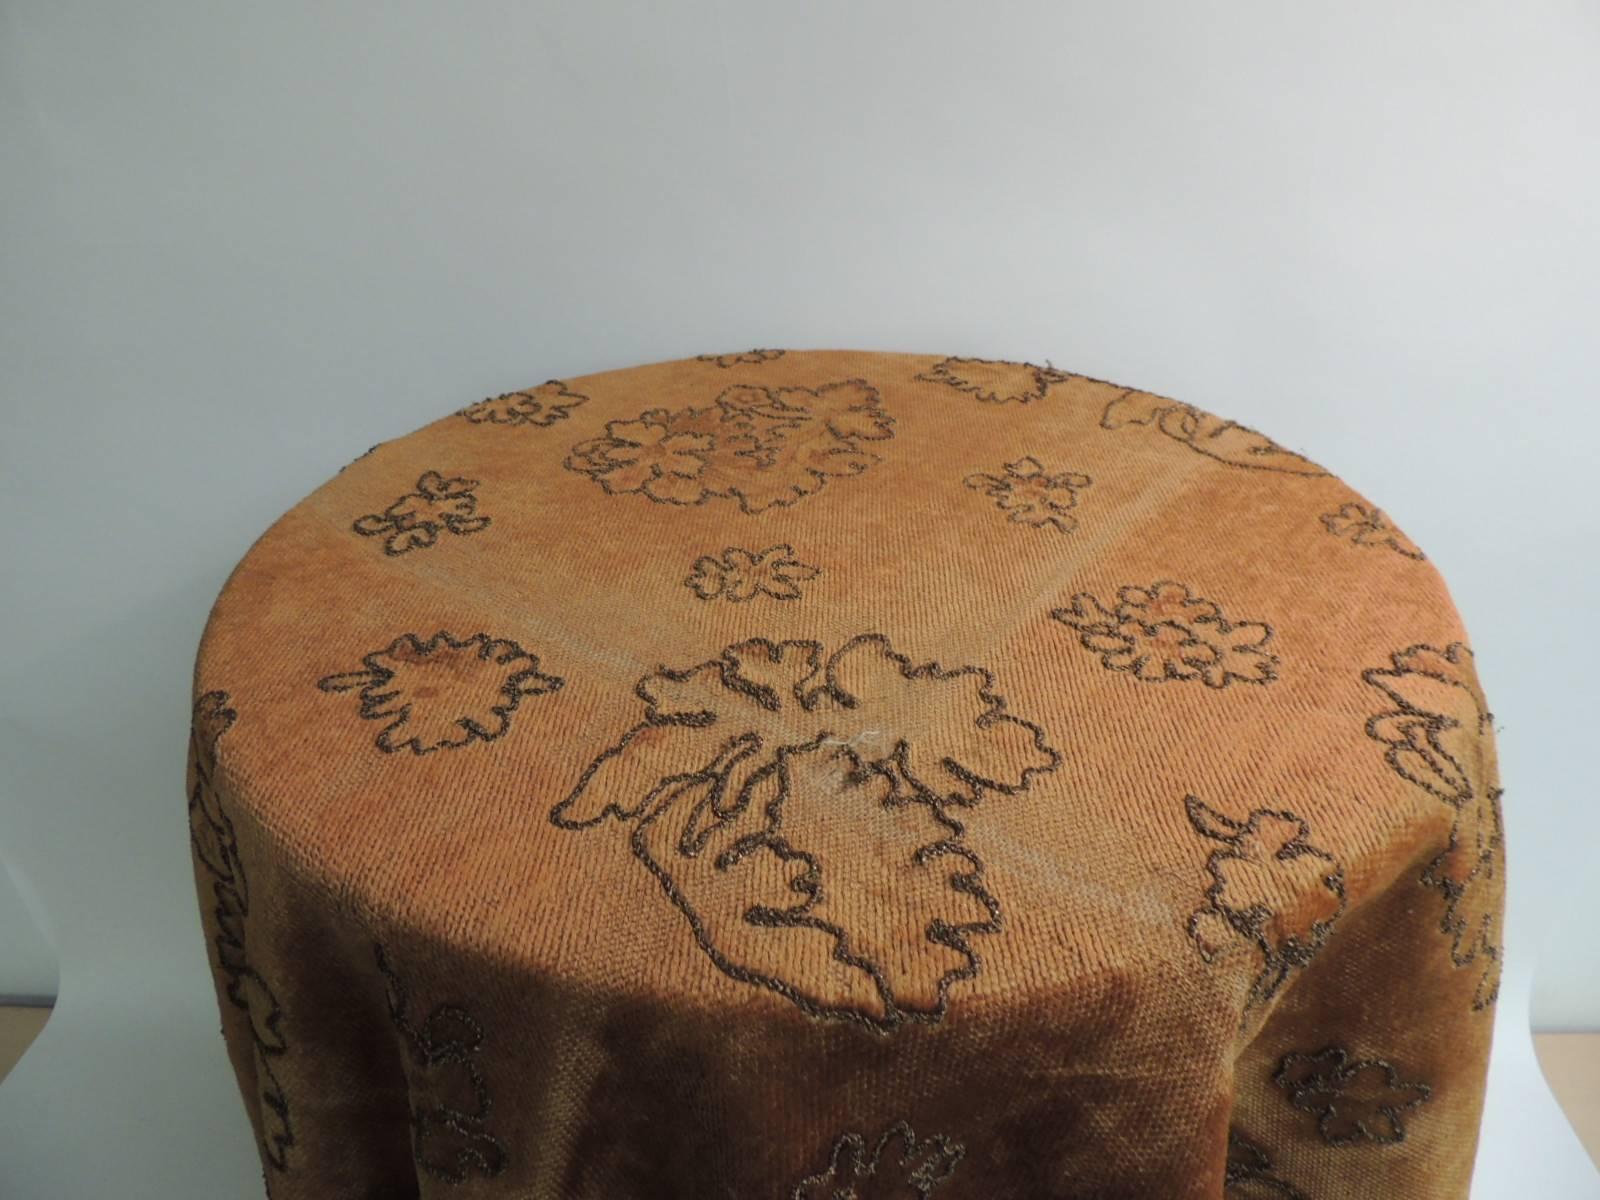 18th century Italian cotton velvet embroidery cloth, heavy floral embroidery of antique gold metallic threads on cotton.
Floral pattern all around and center medallion. Ideal as a table topper or a throw on a sofa.
Size: 51.75